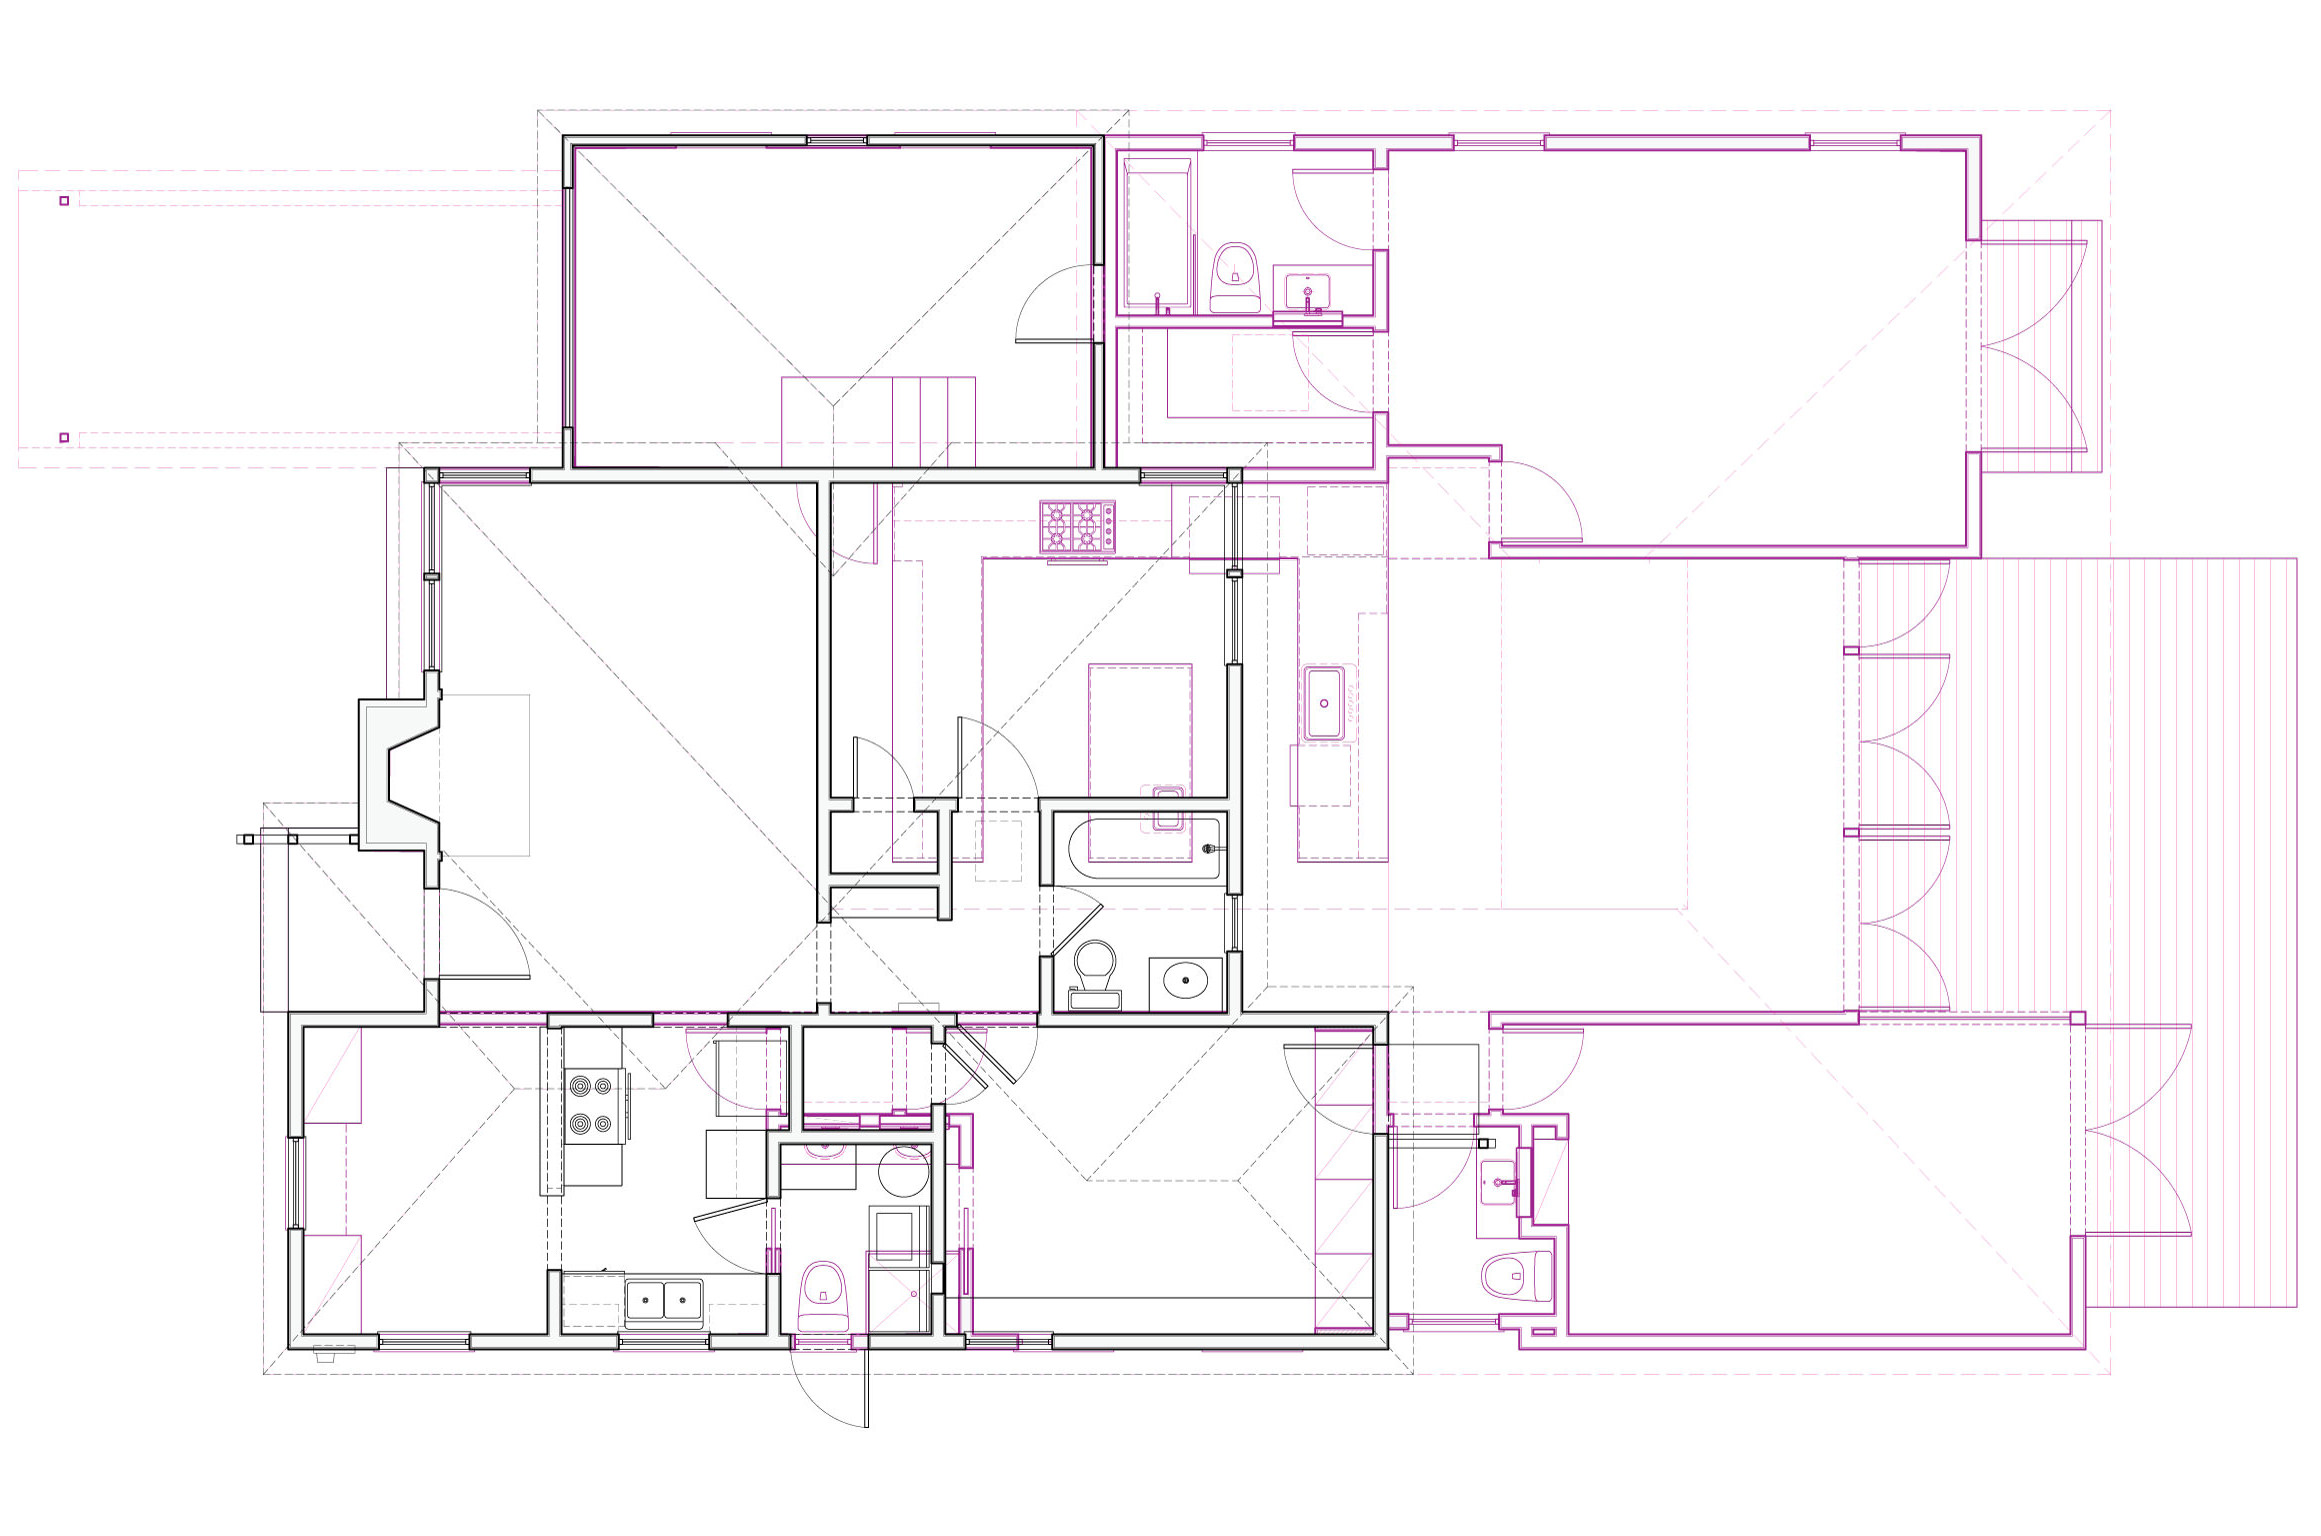  The original house plan with the new plan overlaid in magenta. 